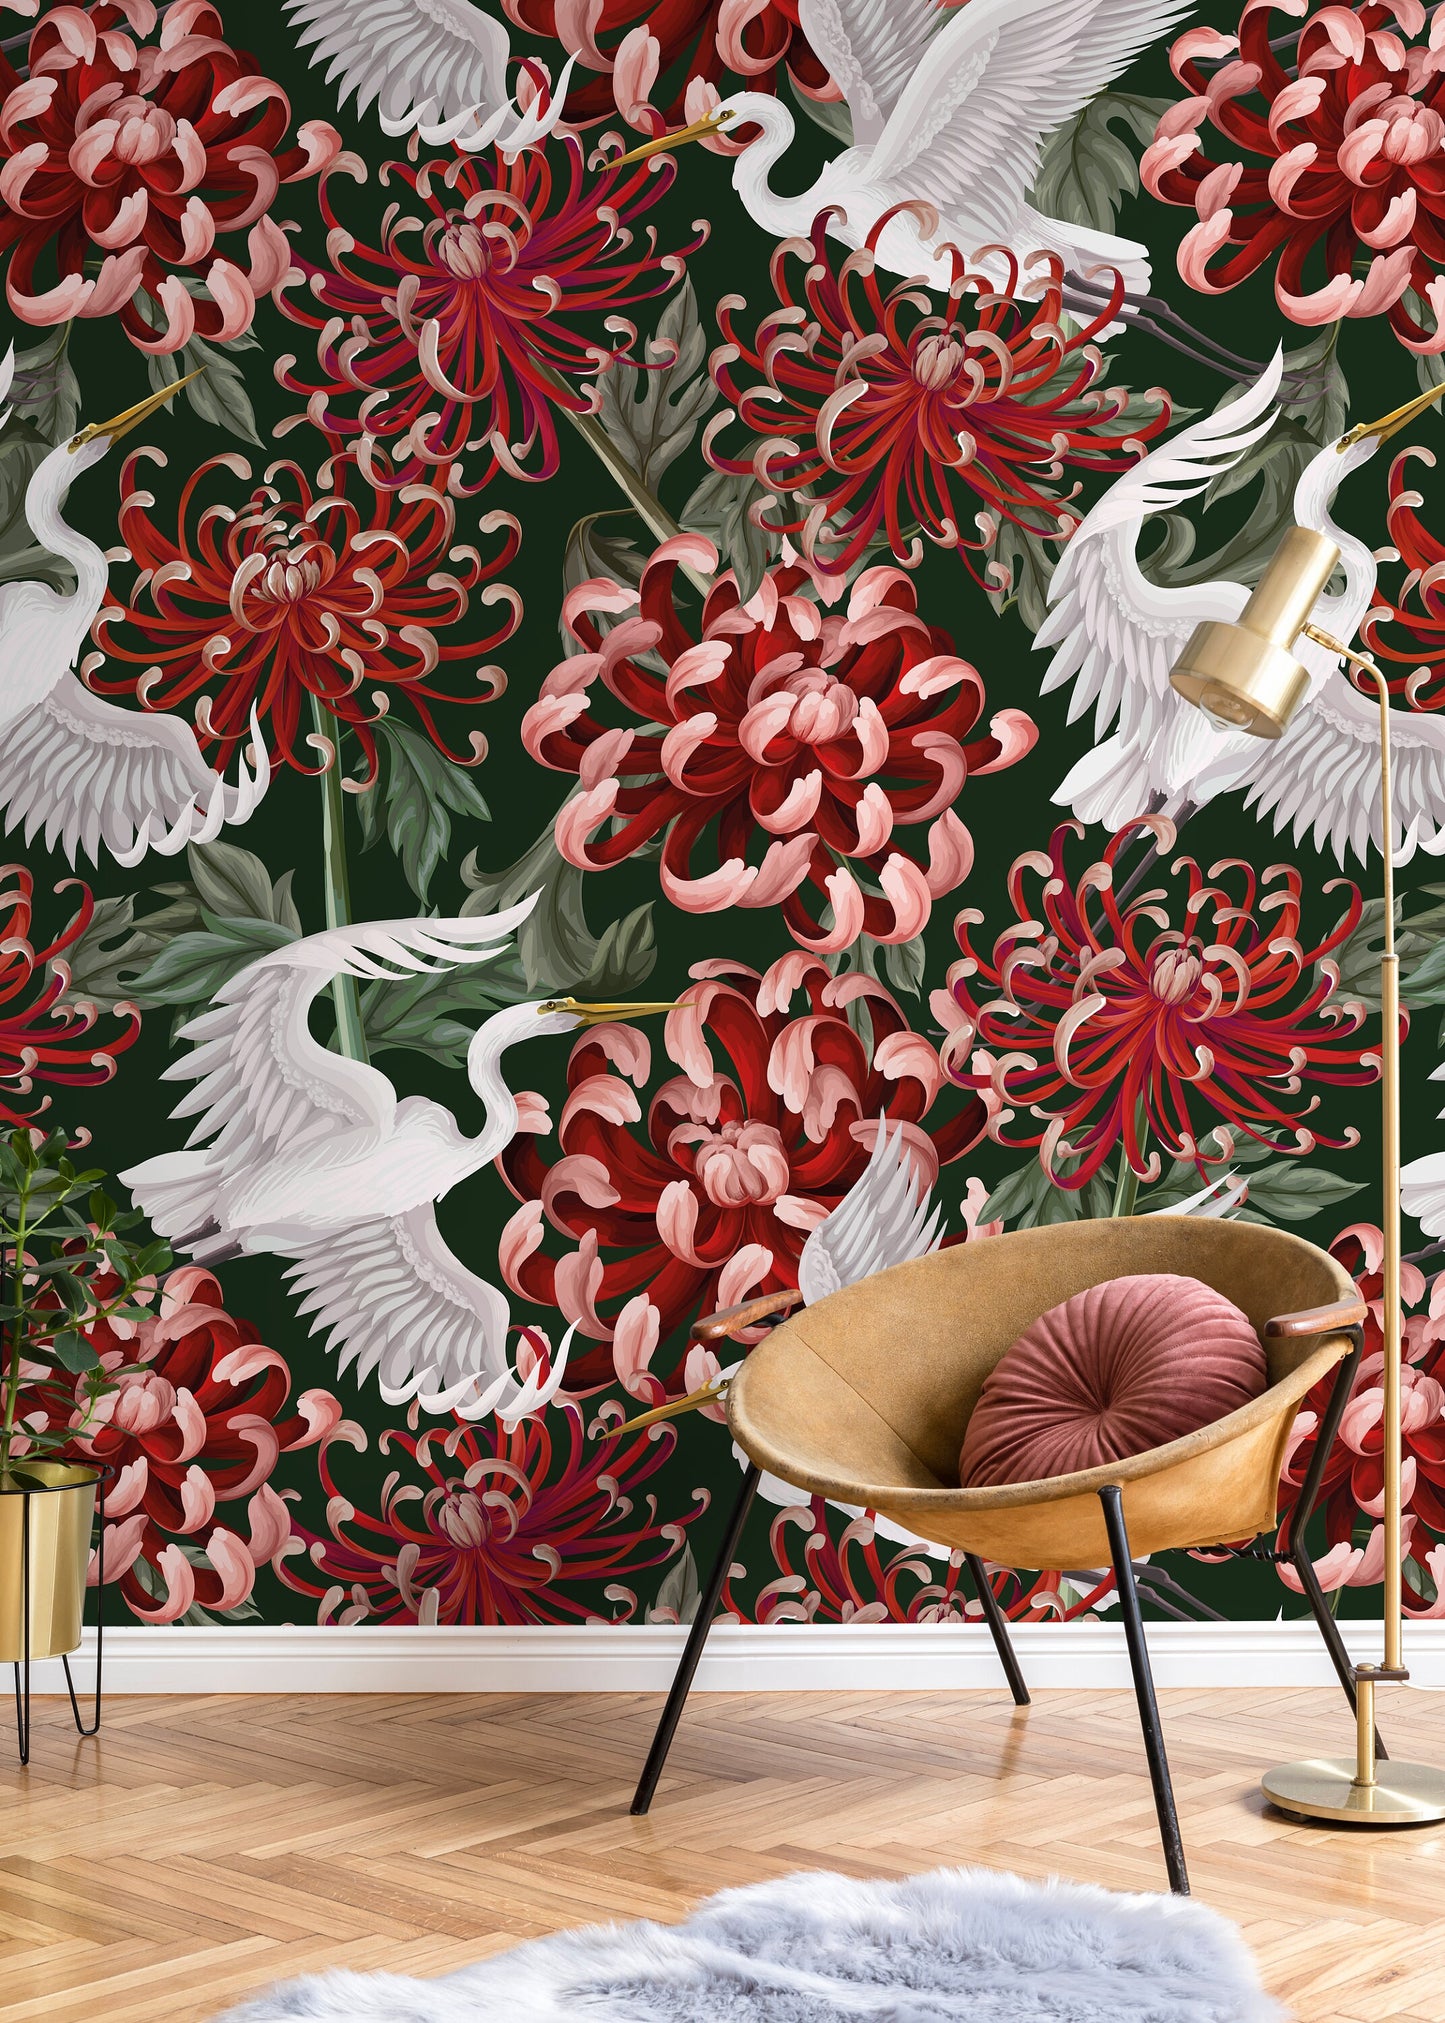 Chinoiserie Red Flower and Crane Birds / Peel and Stick Wallpaper Removable Wallpaper Home Decor Wall Art Wall Decor Room Decor - D264